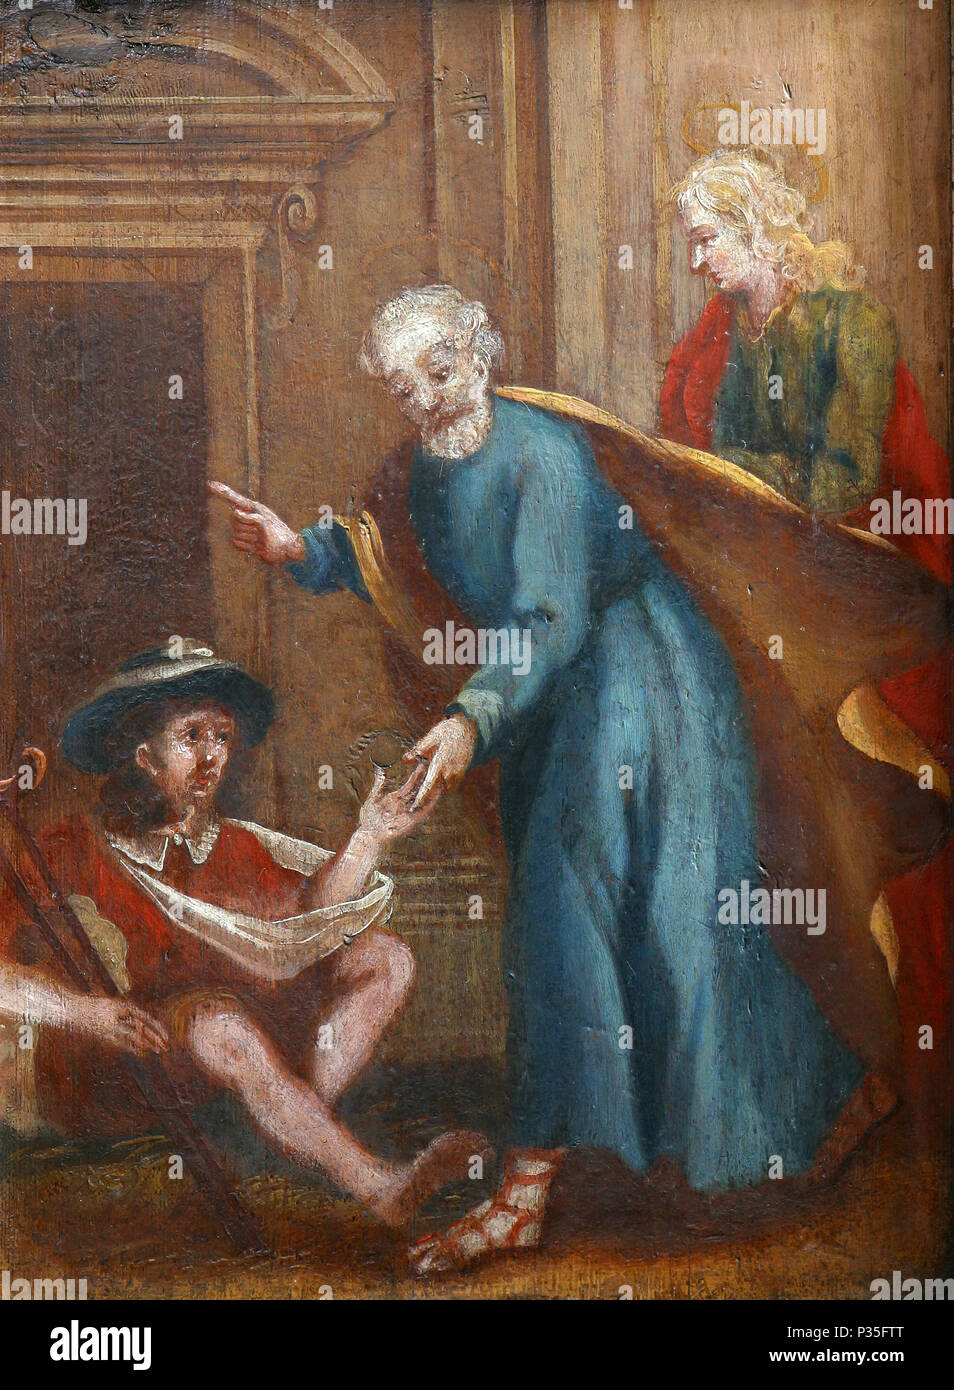 Scenes from the life of St. Peter, picture on a wardrobe in the sacristy of the church of the Immaculate Conception in Lepoglava, Croatia Stock Photo